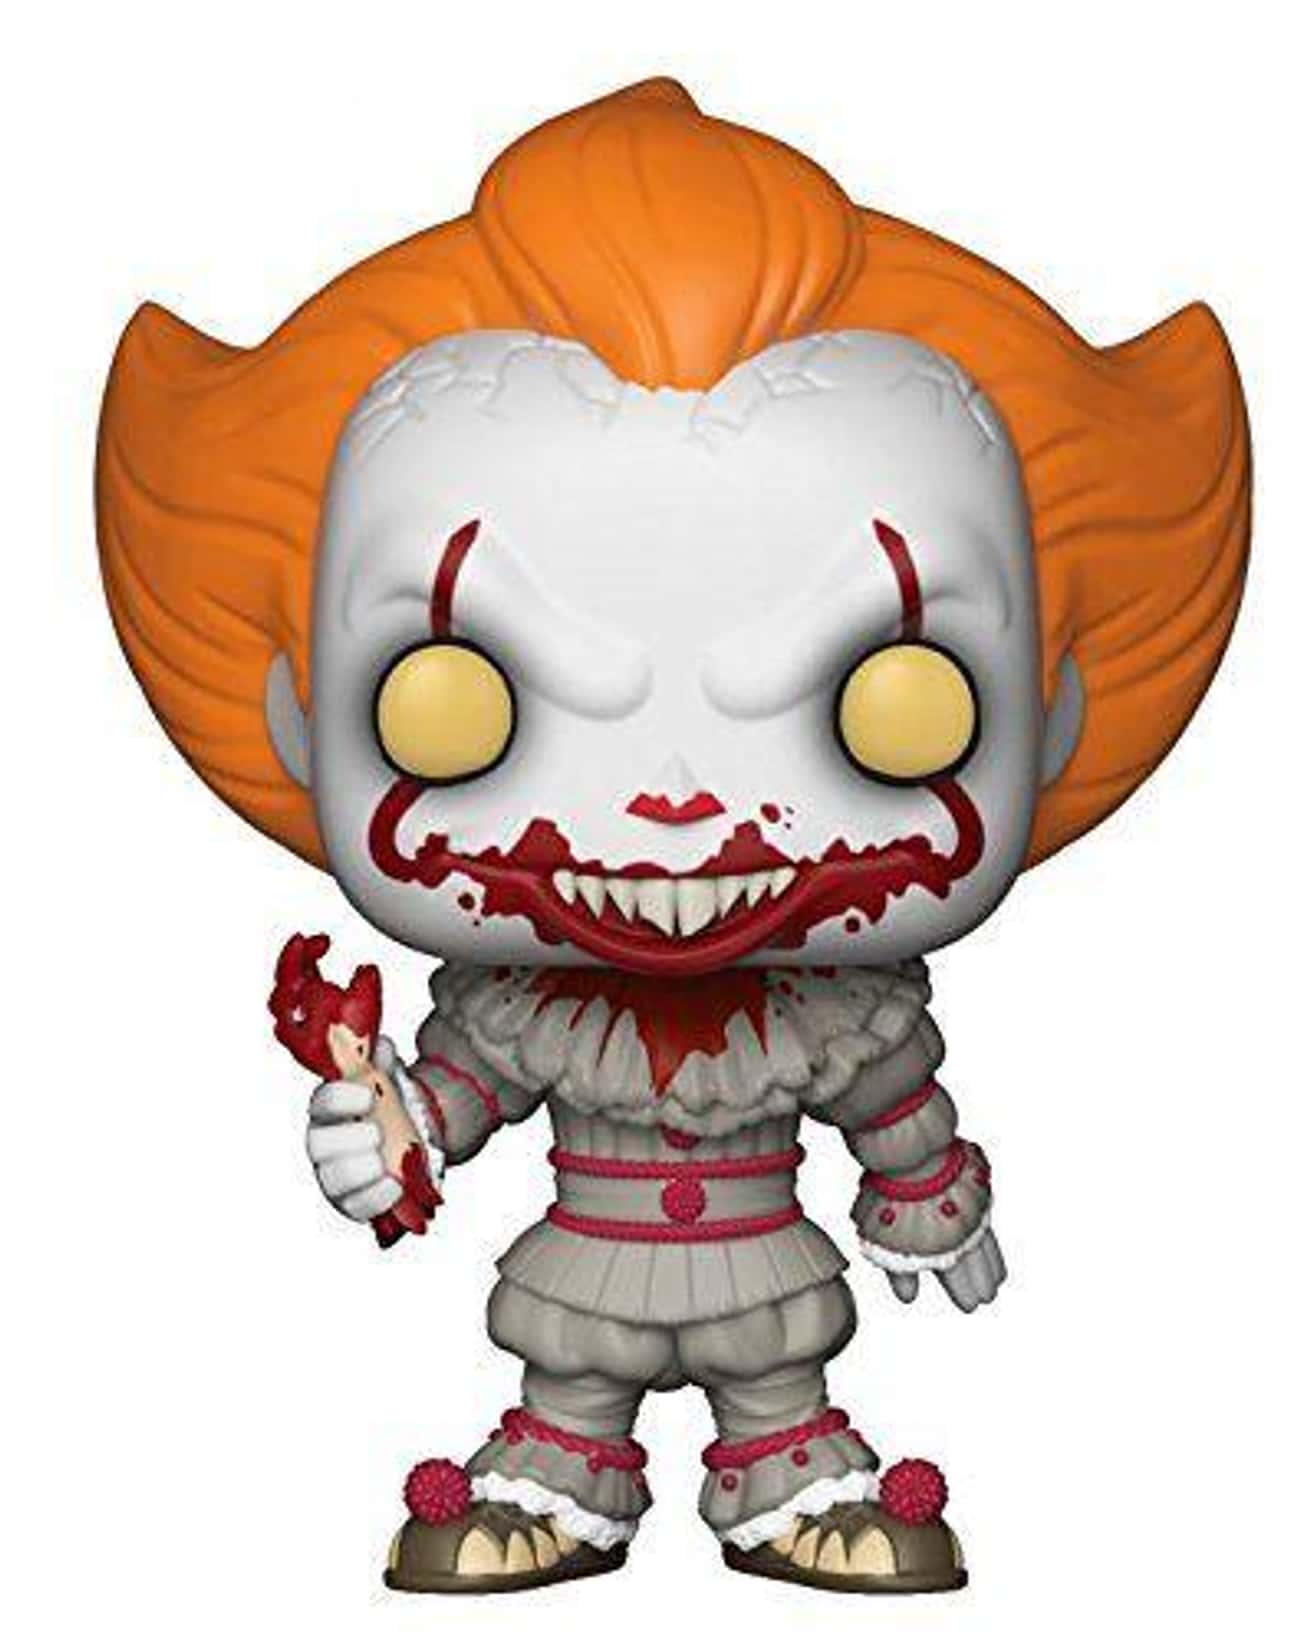 Pennywise From 'It' With A Severed Arm